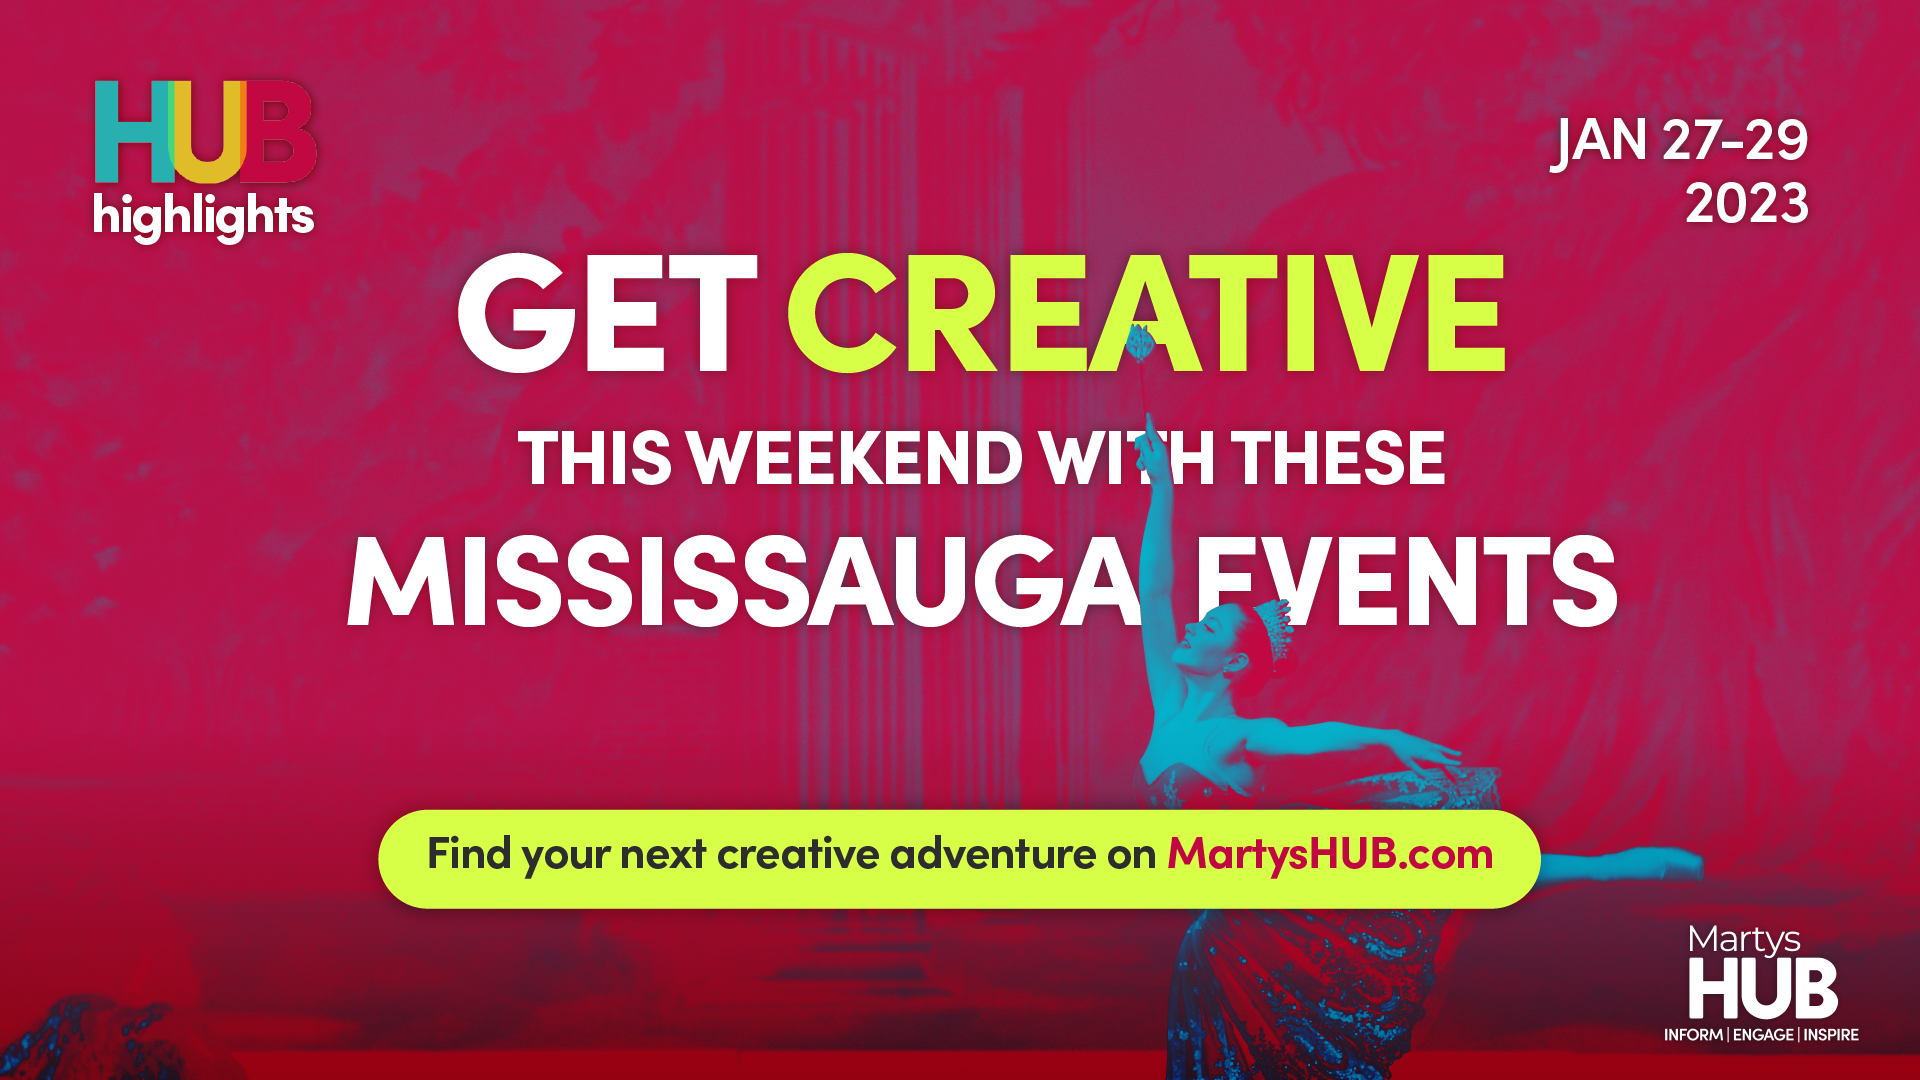 Get creative this weekend with these events in Mississauga (Jan 27-29)